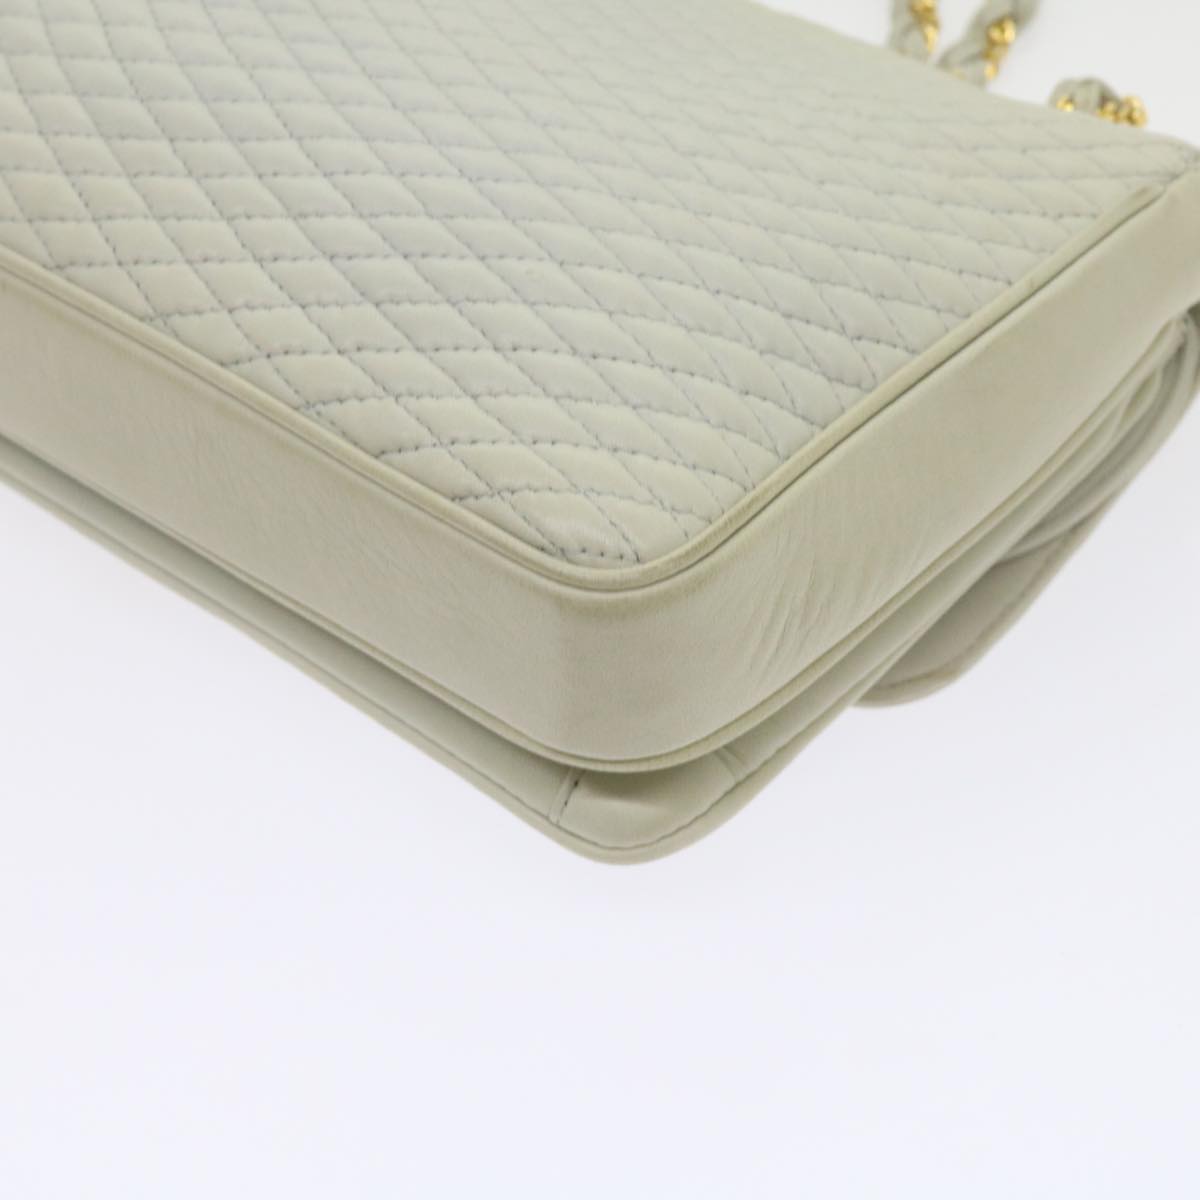 BALLY Quilted Chain Shoulder Bag Leather White Auth yk9755